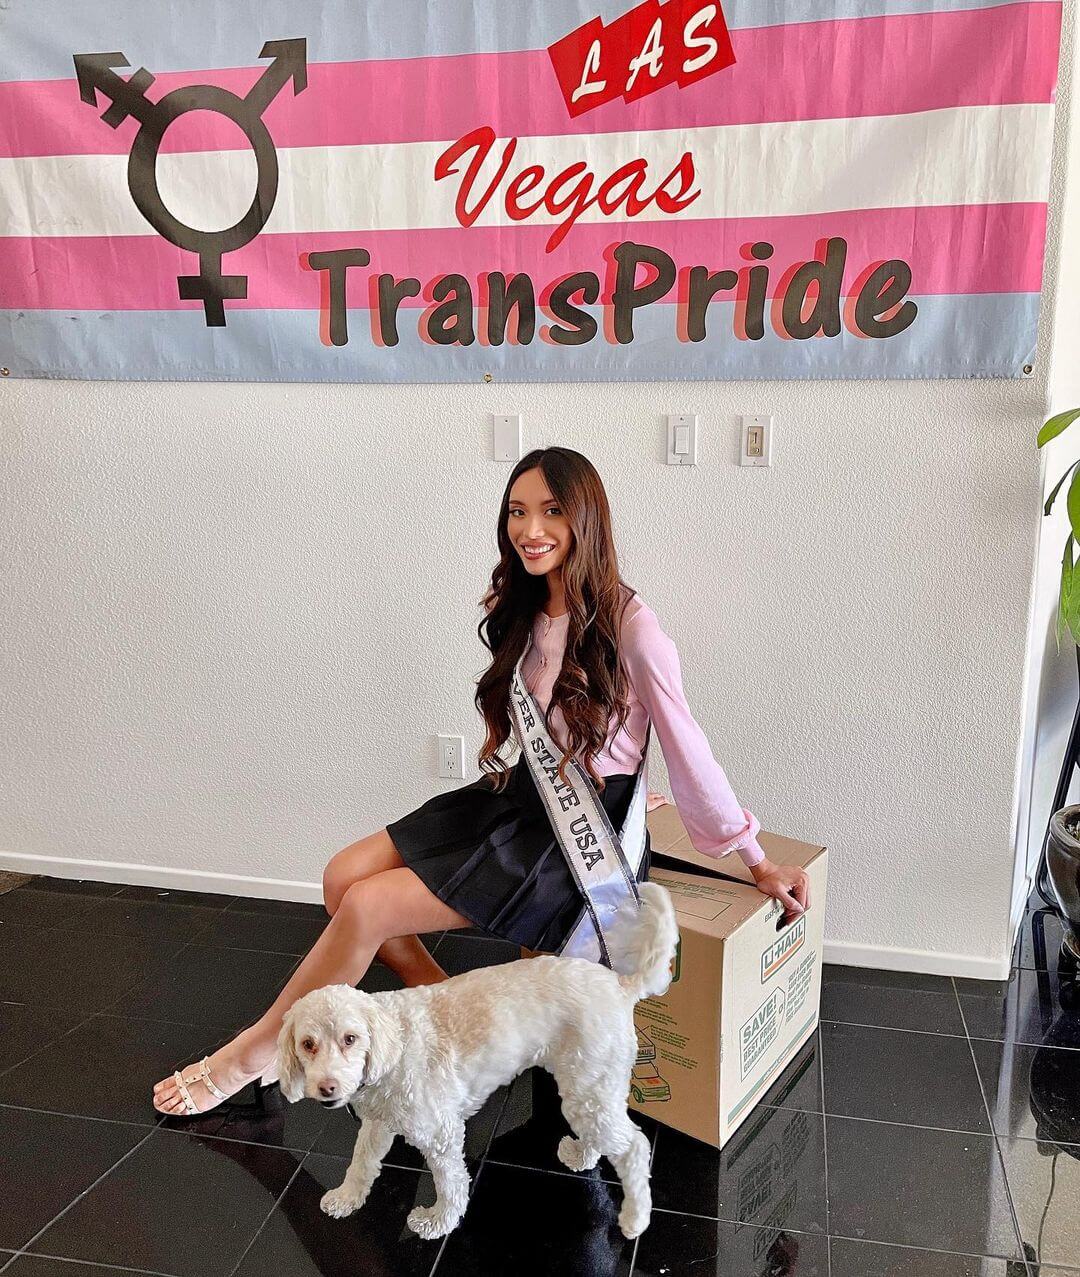 Kataluna Enriquez, Miss Silver State NV USA 2021, is a proud trans model and pageant titleholder who volunteers with LGBTQ+ organizations